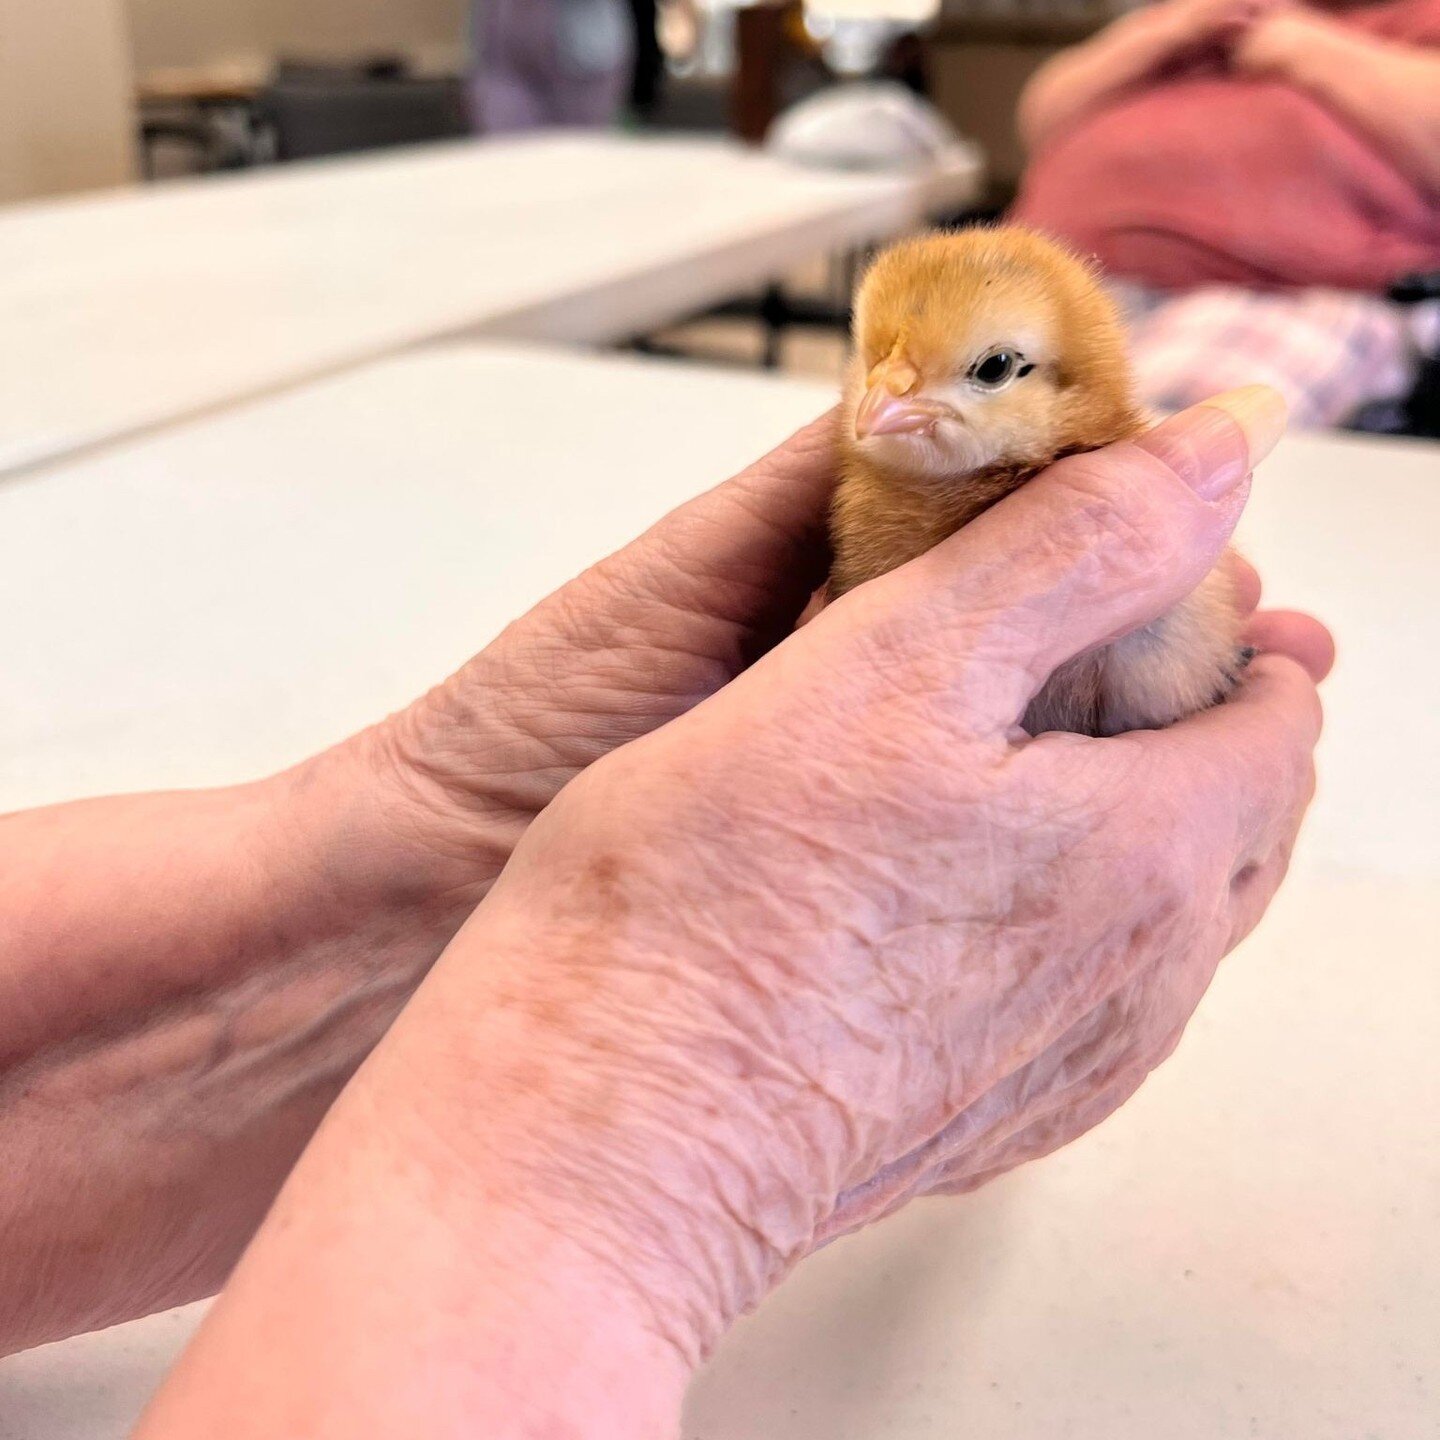 Some chicks have invaded some of our lodges, but our residents love them!
Baby Ducklings first start out with a fuzzy fluff before later growing feathers.
#SeniorLife #Chicks #Cute #Duckling